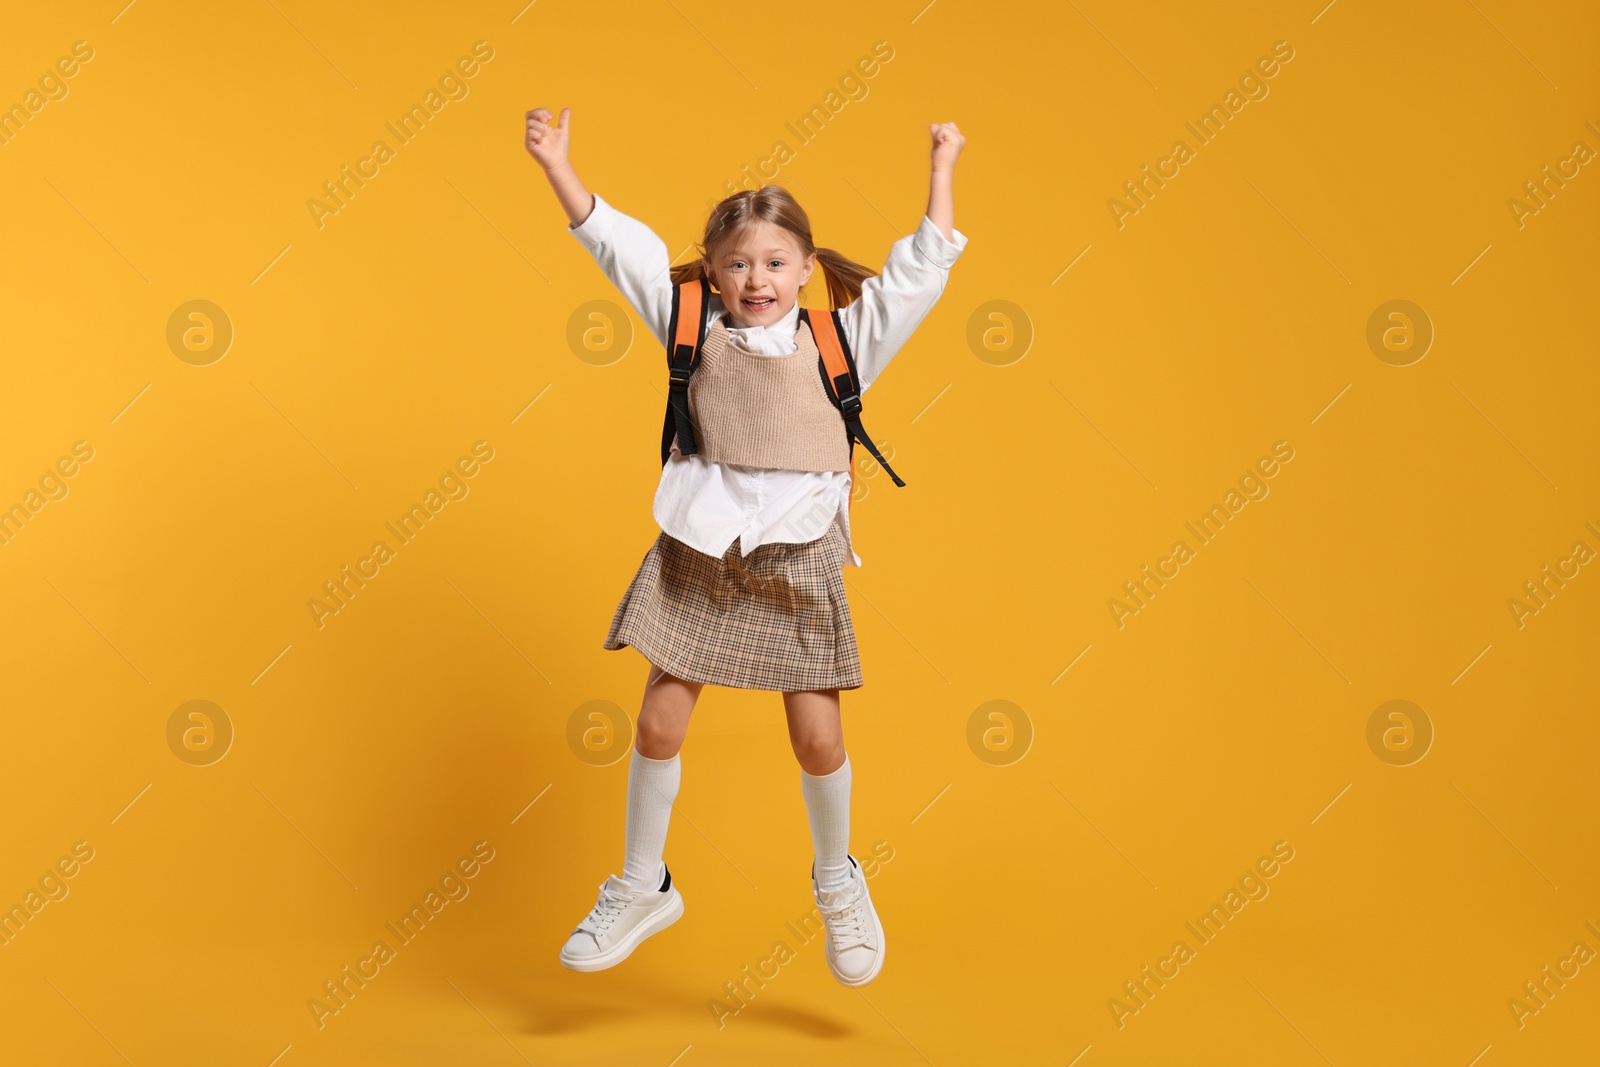 Photo of Happy schoolgirl with backpack jumping on orange background